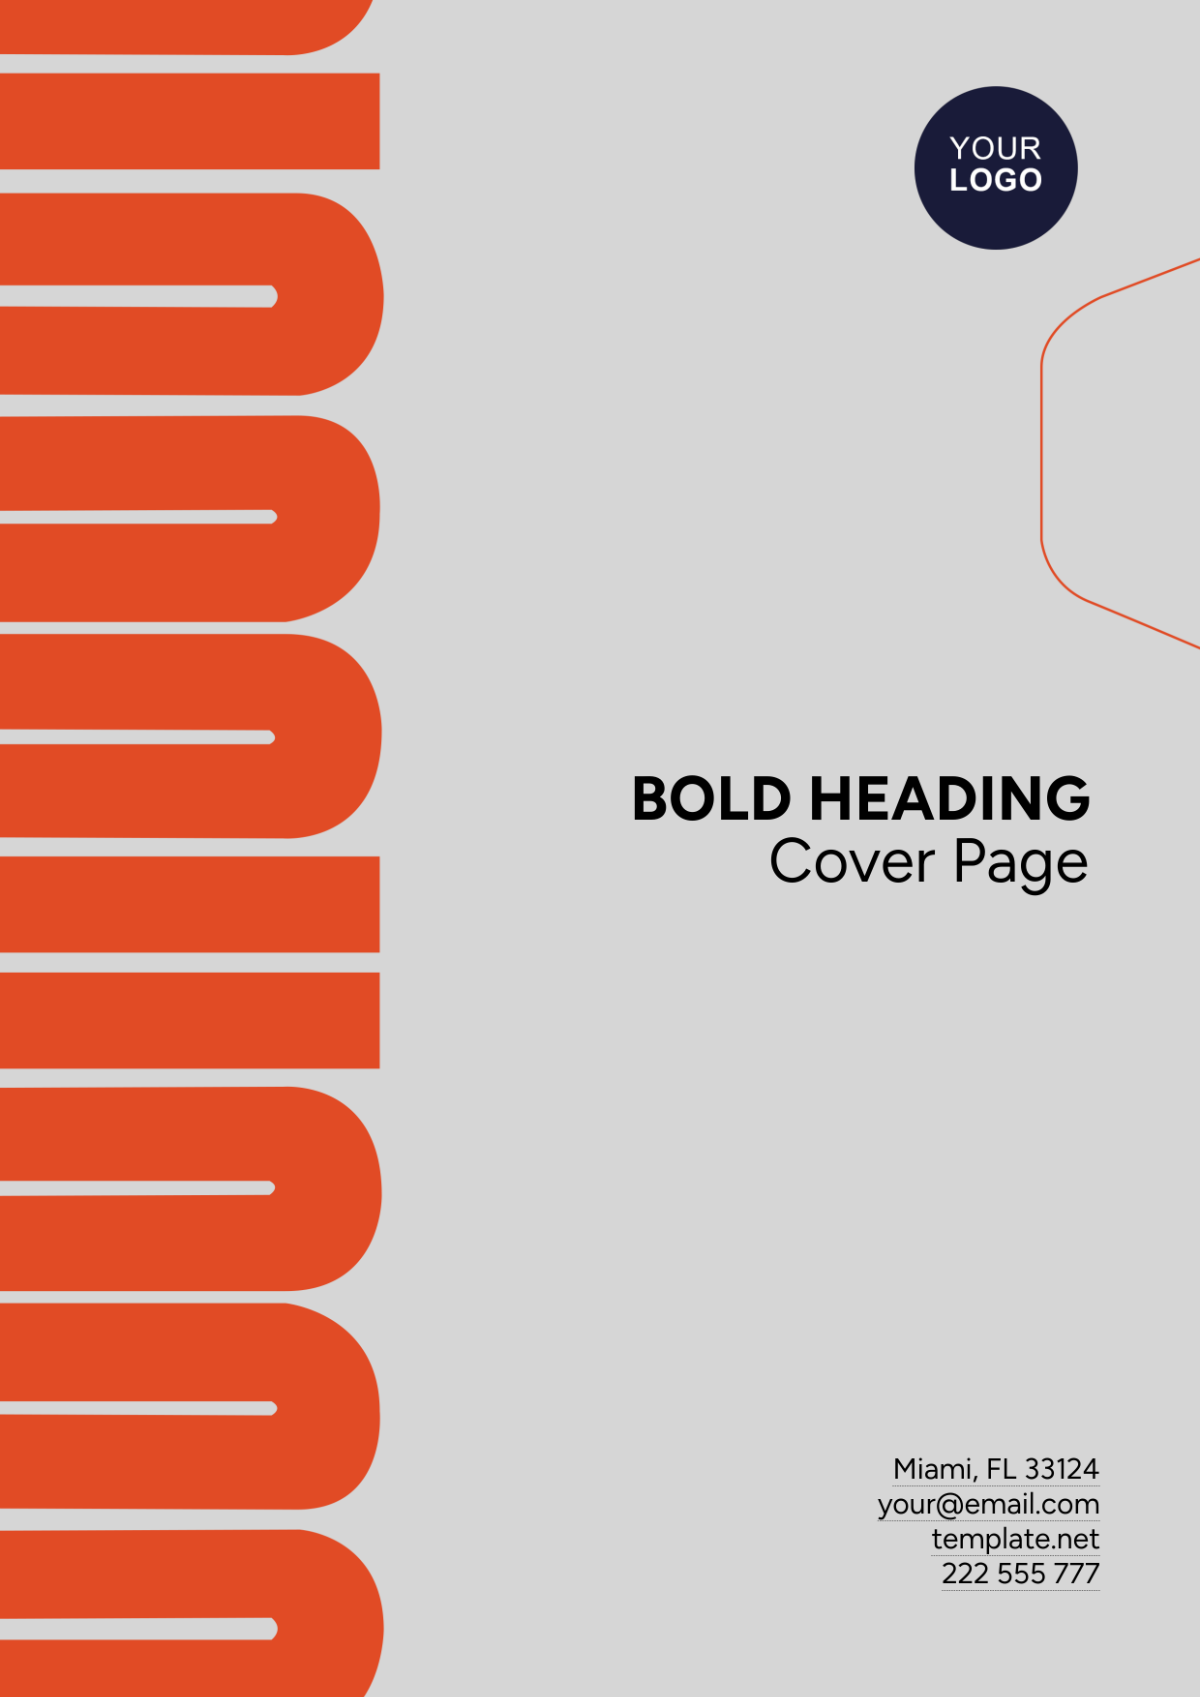 Bold Heading Cover Page